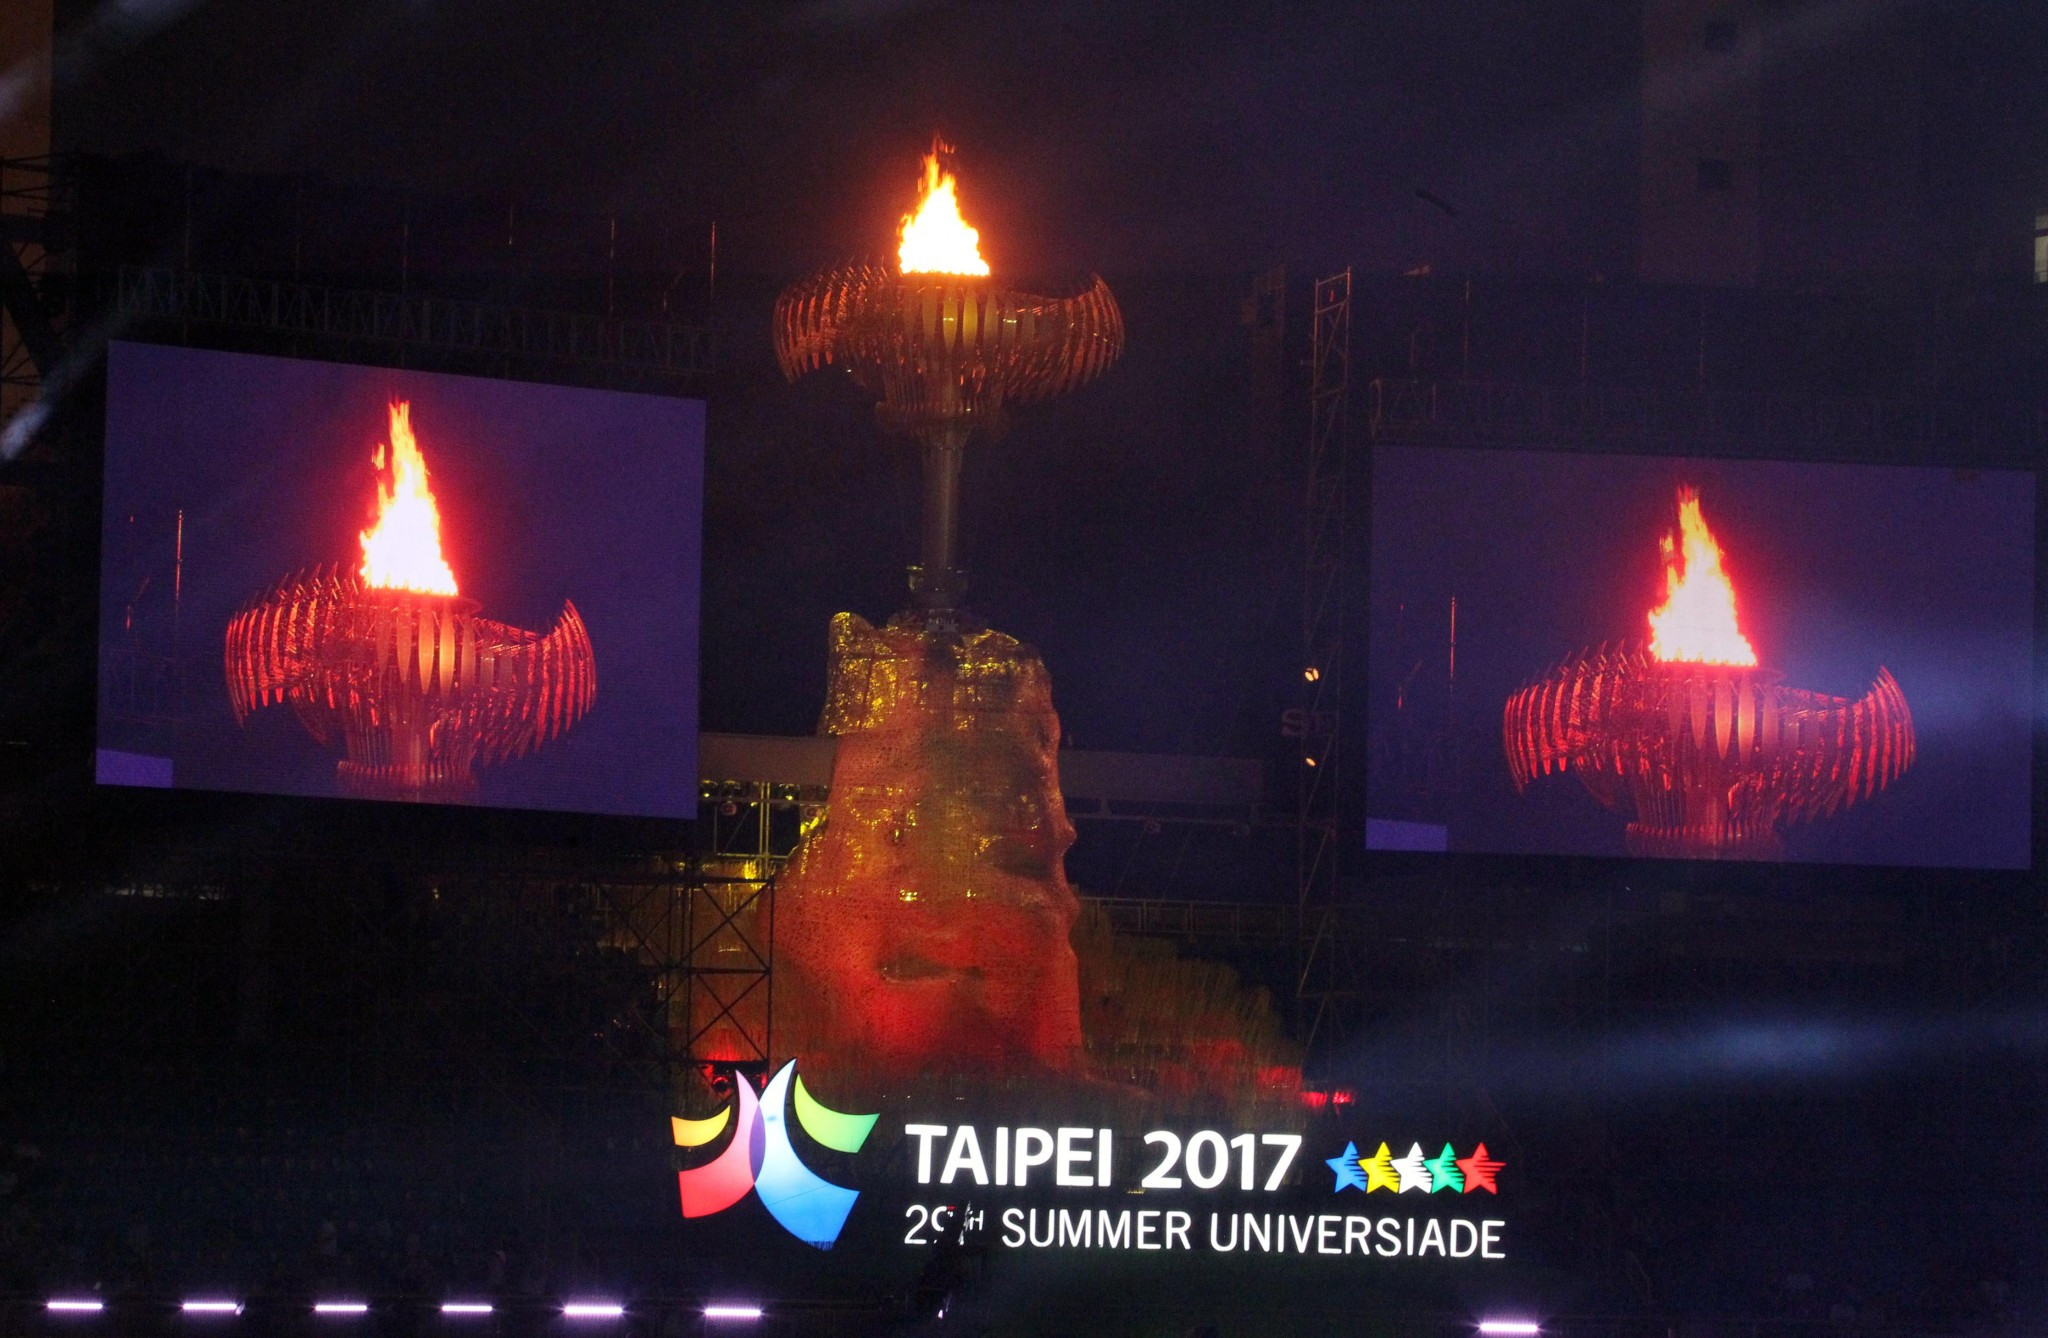 Taipei 2017: Opening Ceremony of the 29th Summer Universiade